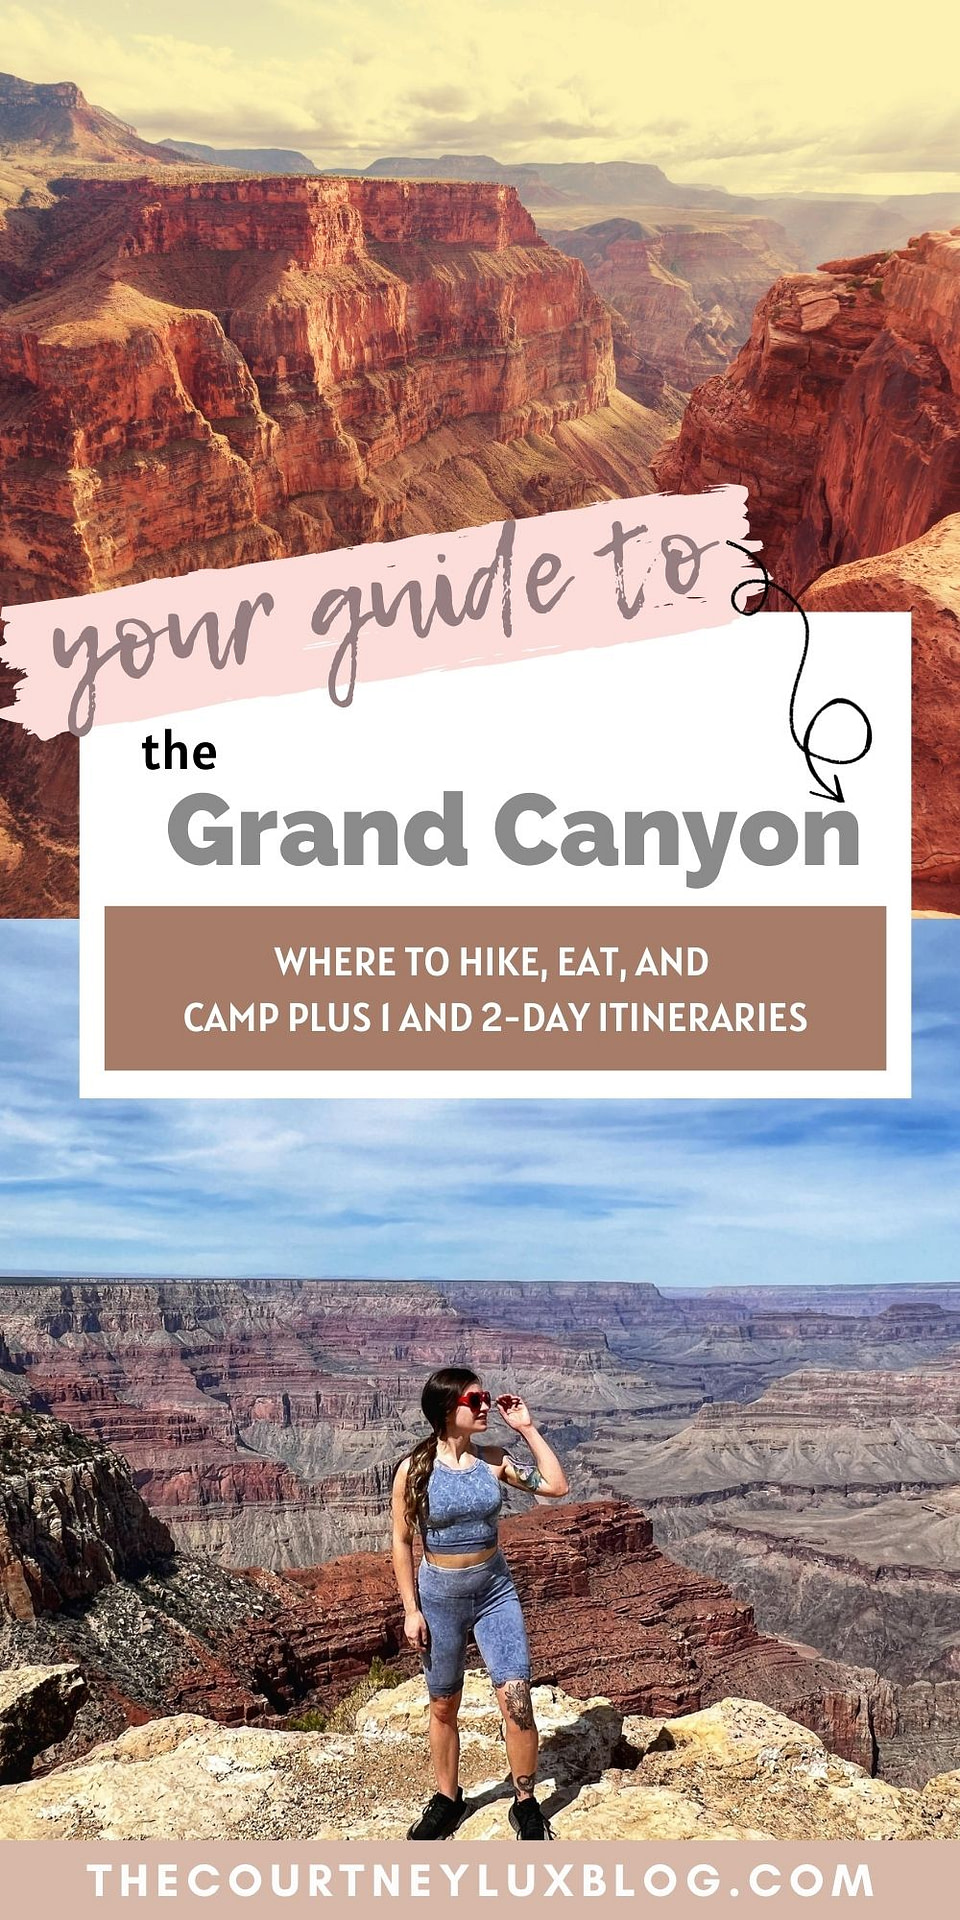 The Grand Canyon in Arizona | A Complete Guide - The Courtney Lux Blog